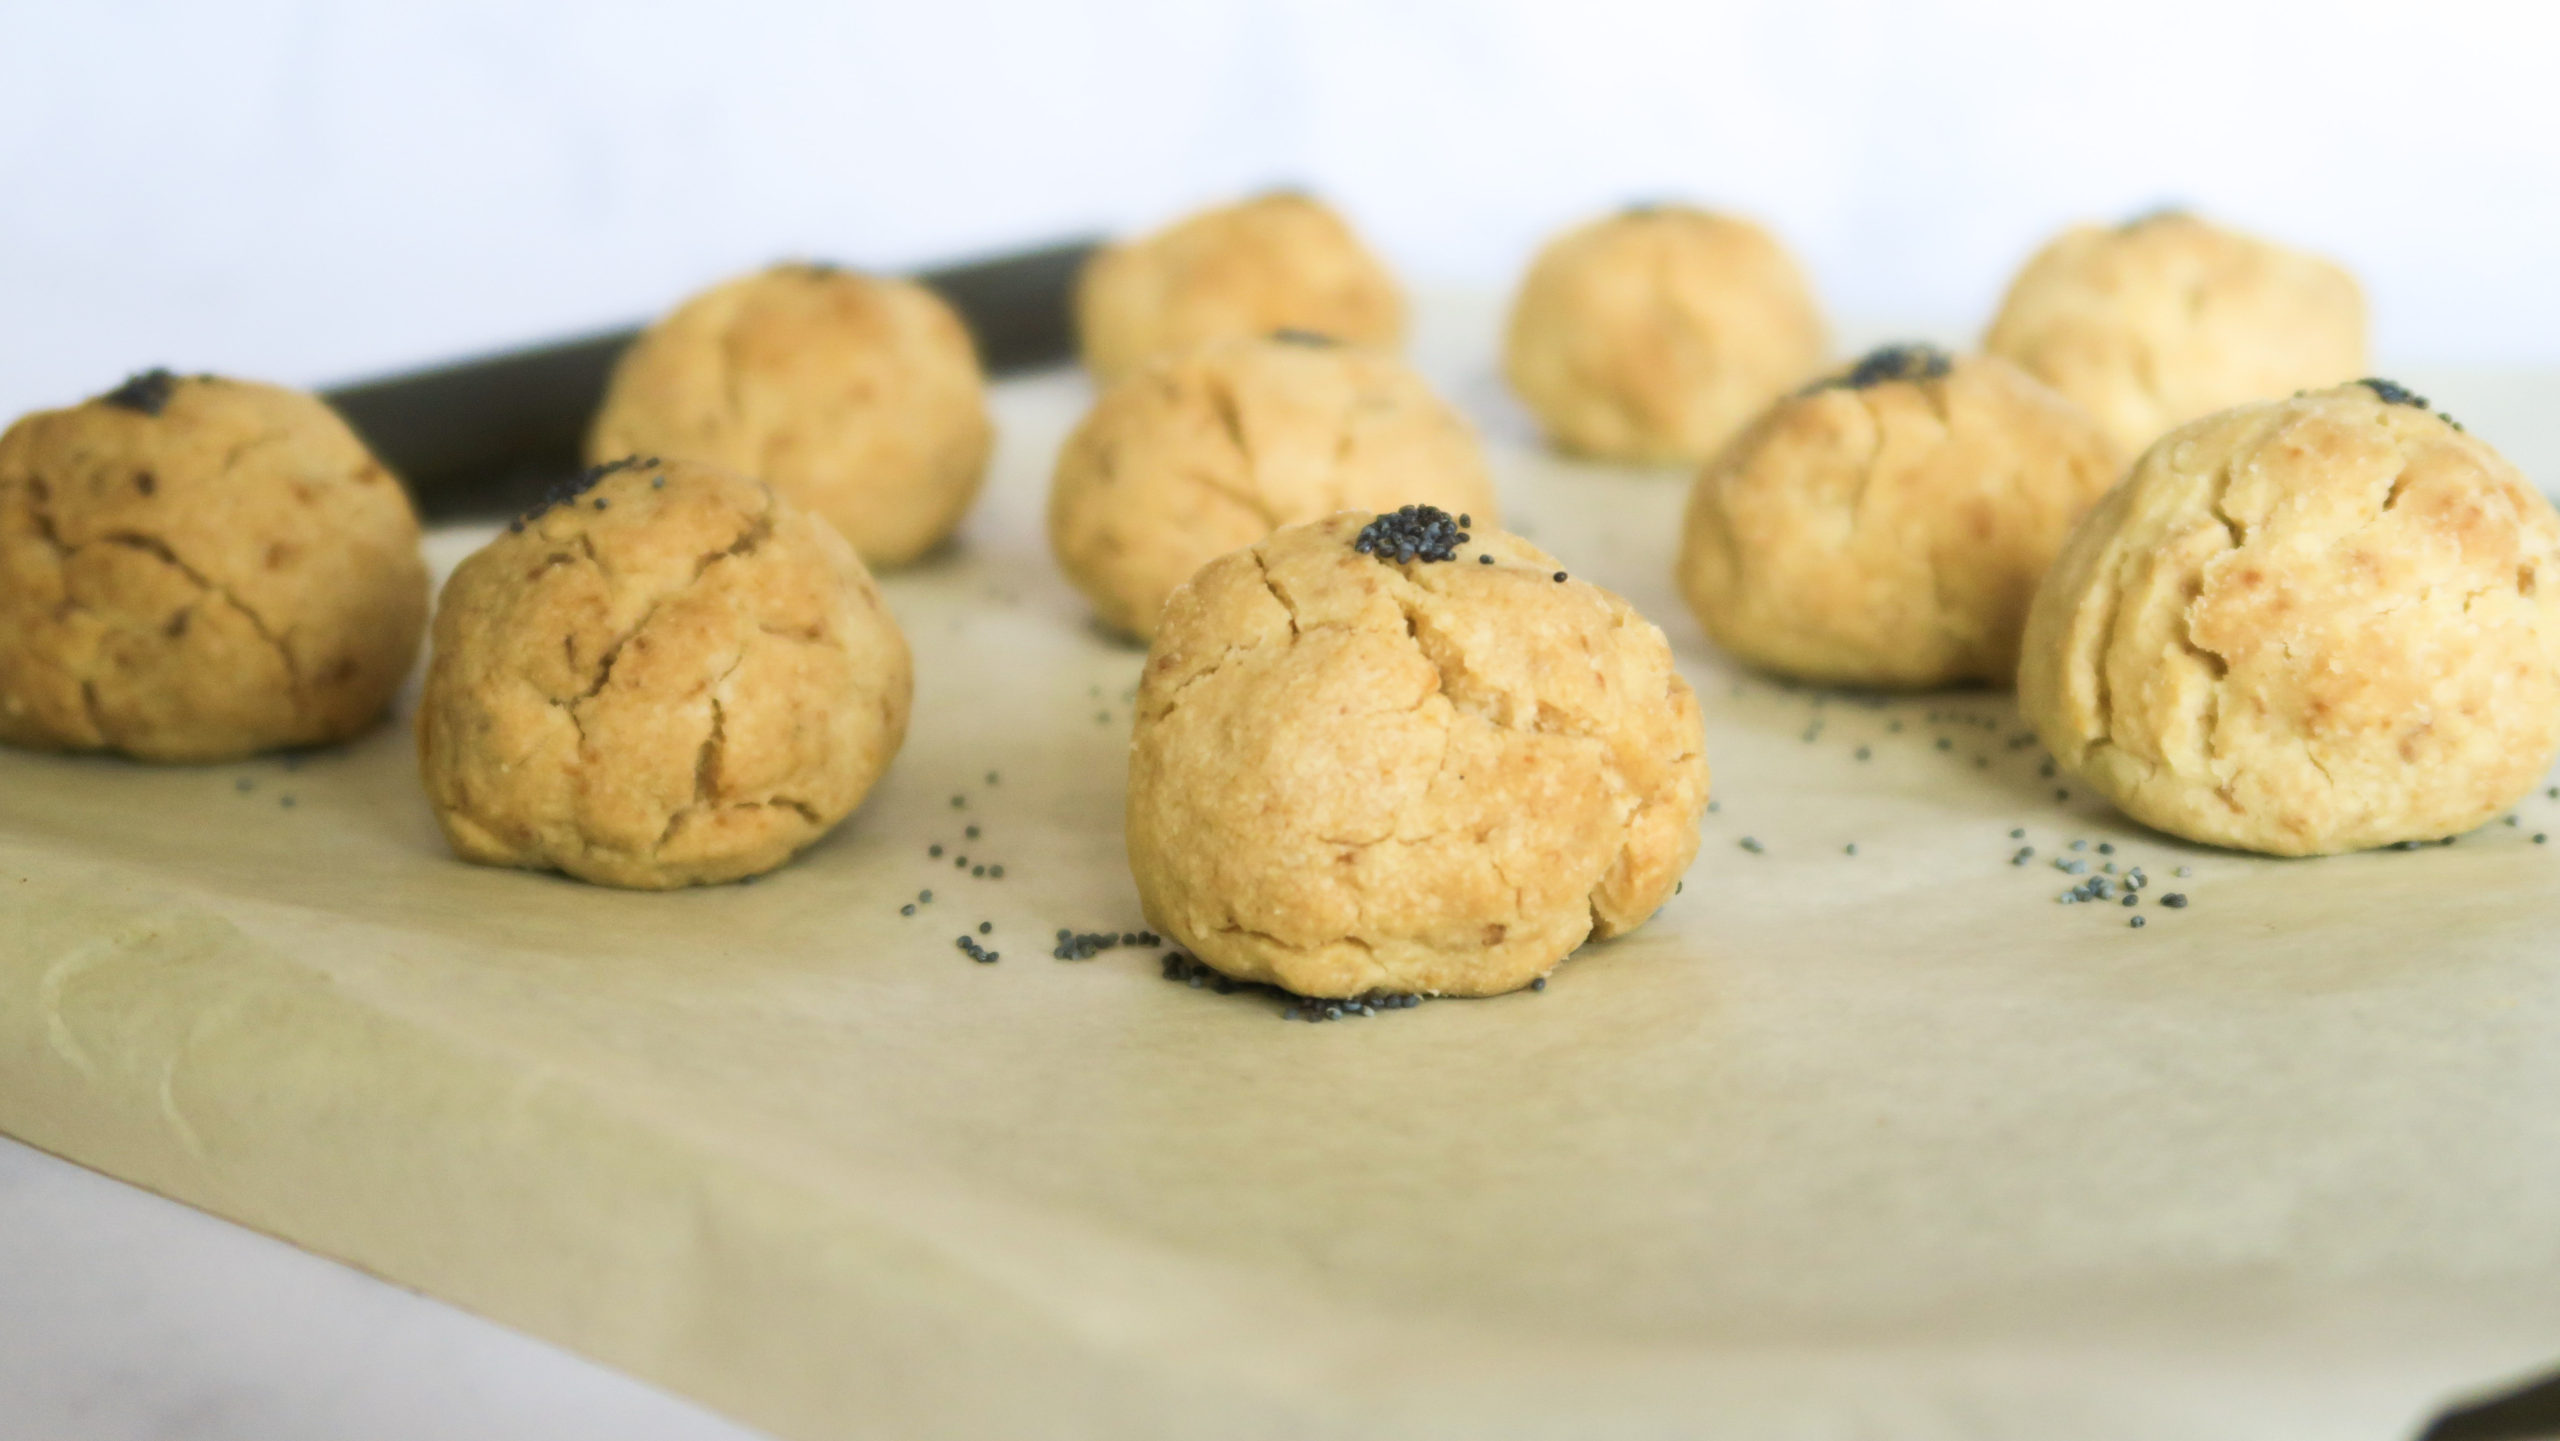 Lemon and Poppy Seed Ghoriba biscuits